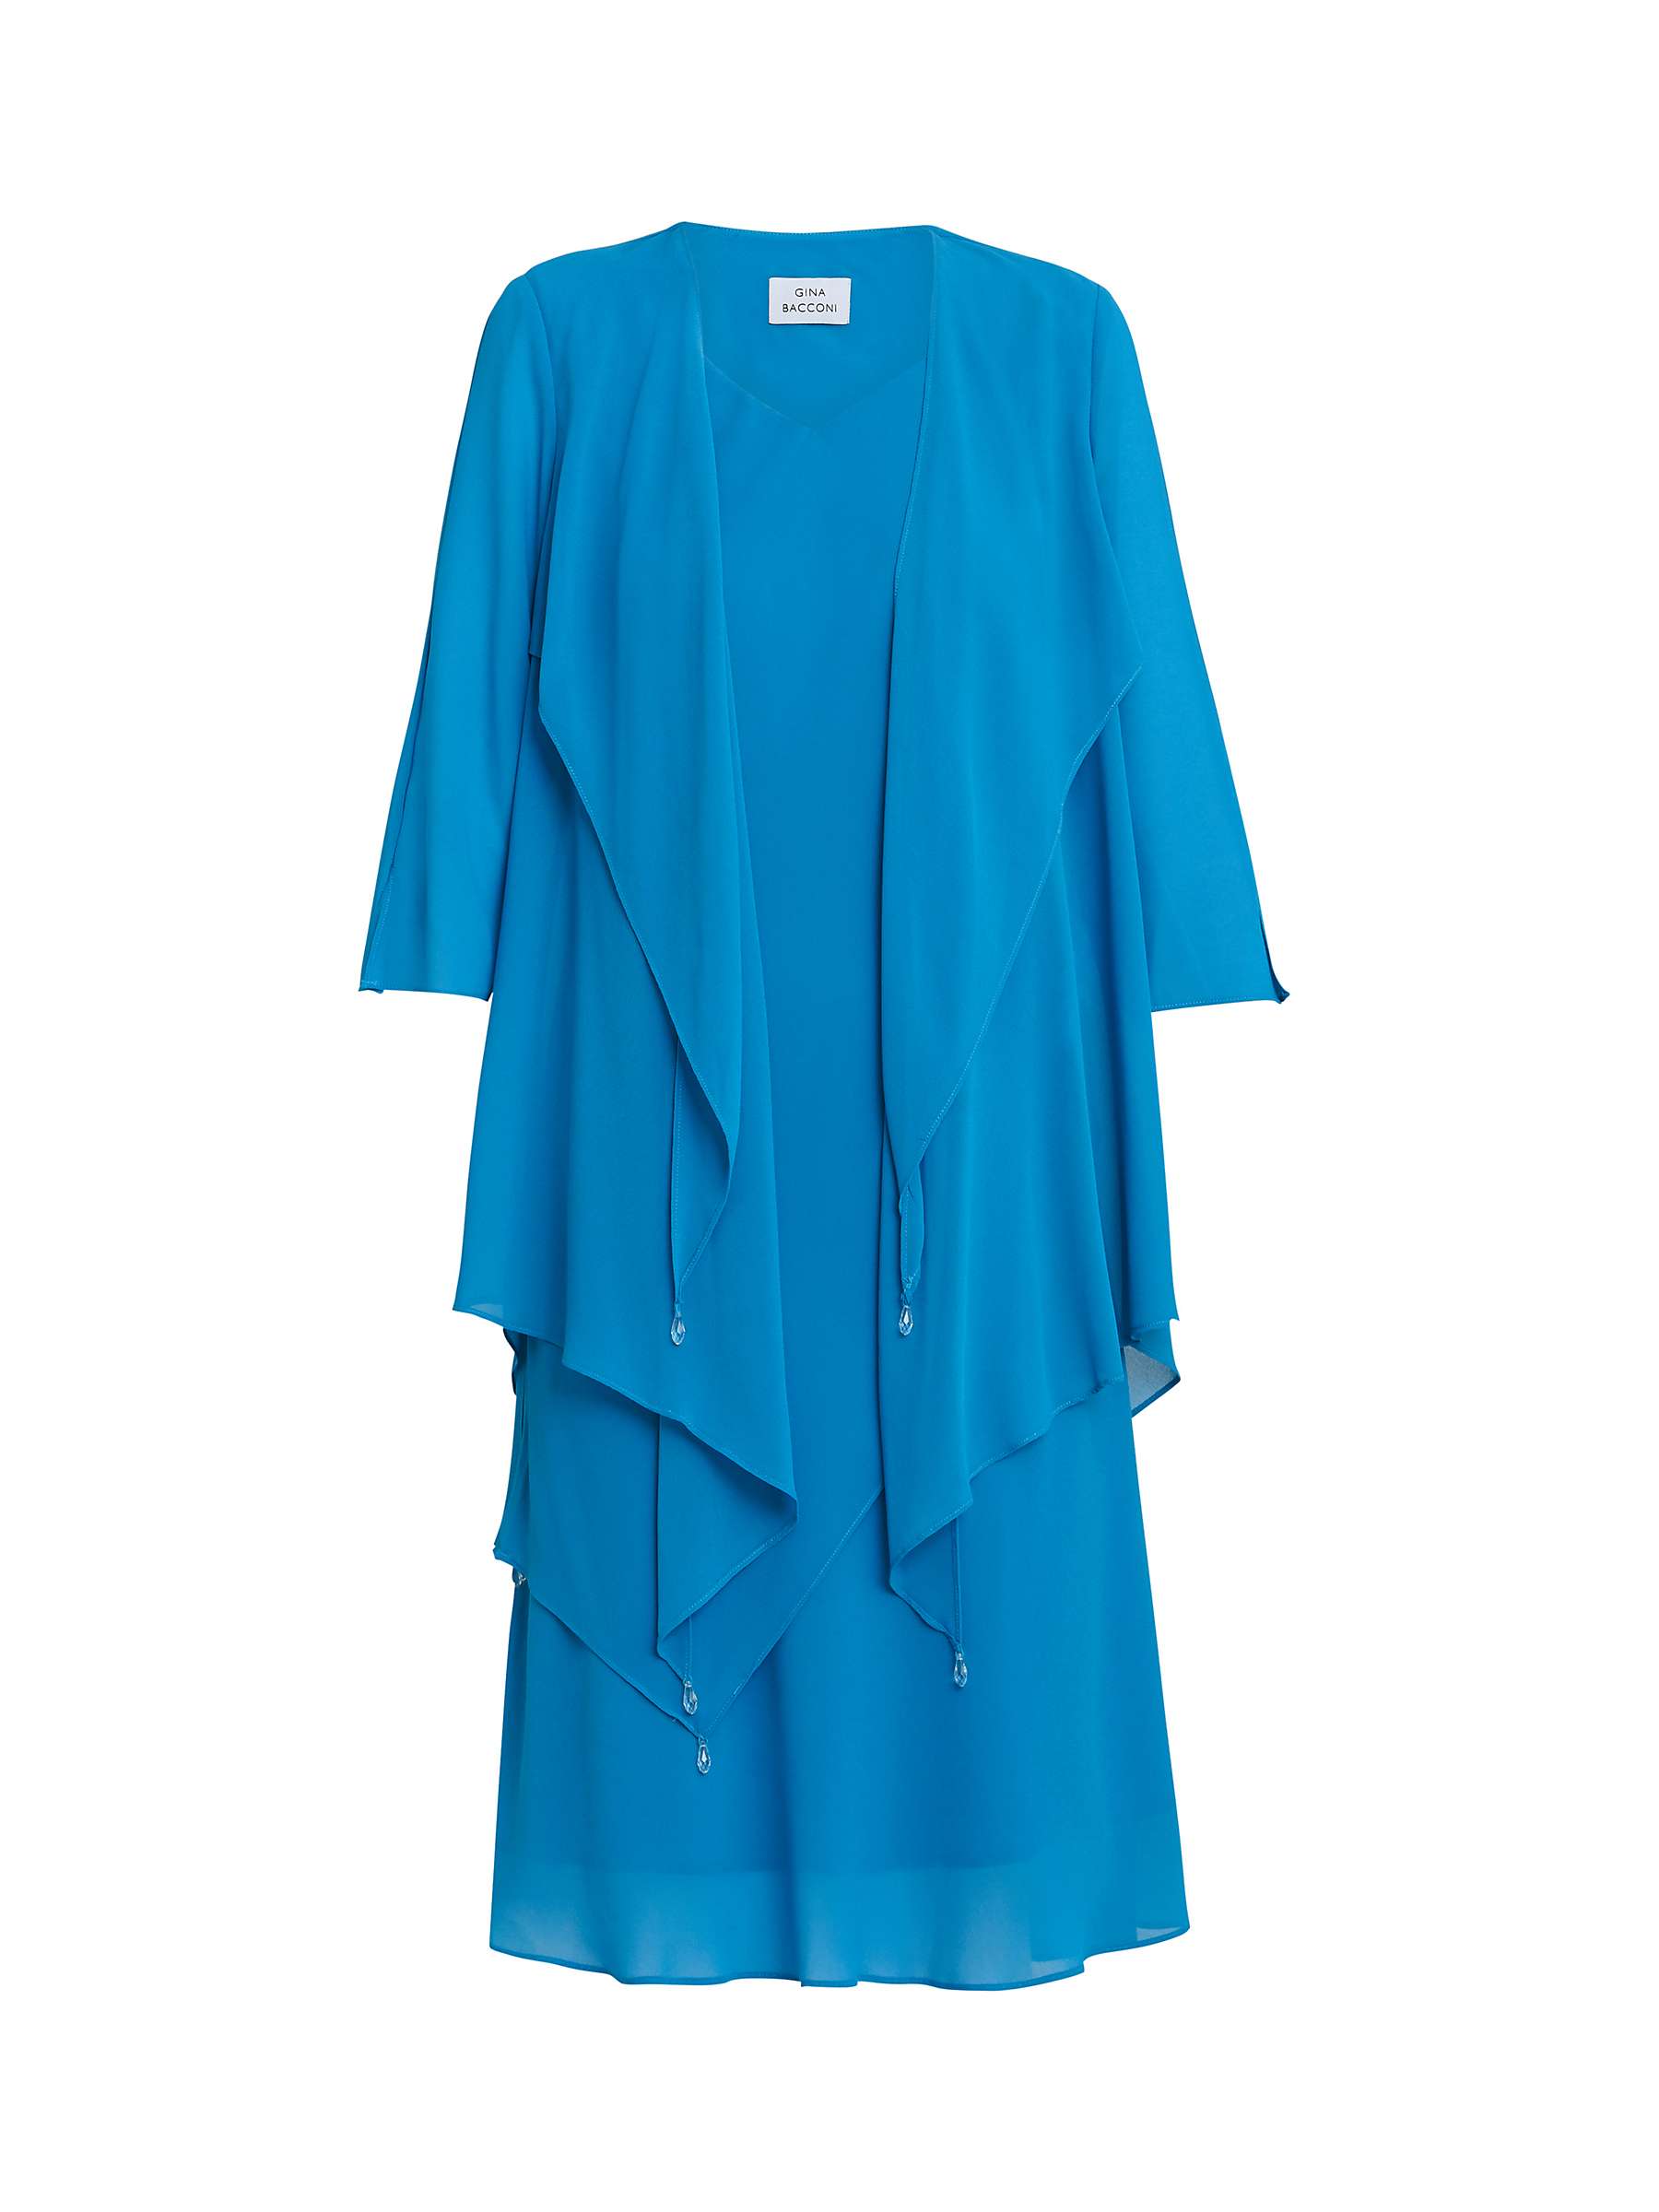 Buy Gina Bacconi Rita Two Piece Jacket and Dress, Blue Online at johnlewis.com